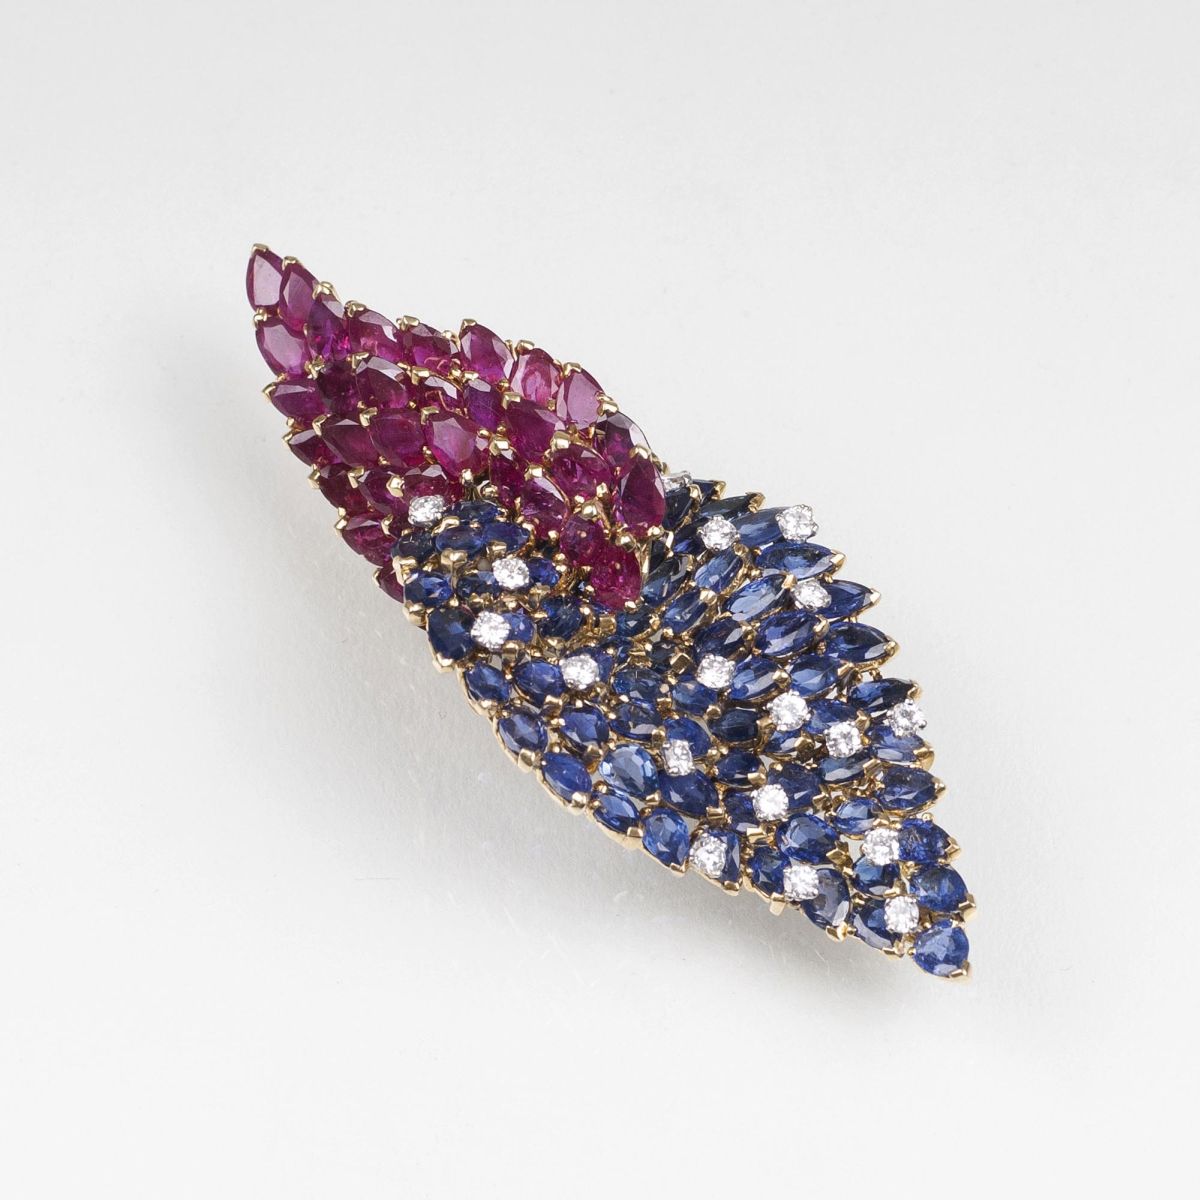 An extraordinary French Vintage Brooch with Rubies, Diamonds and Natural Sapphires - image 3